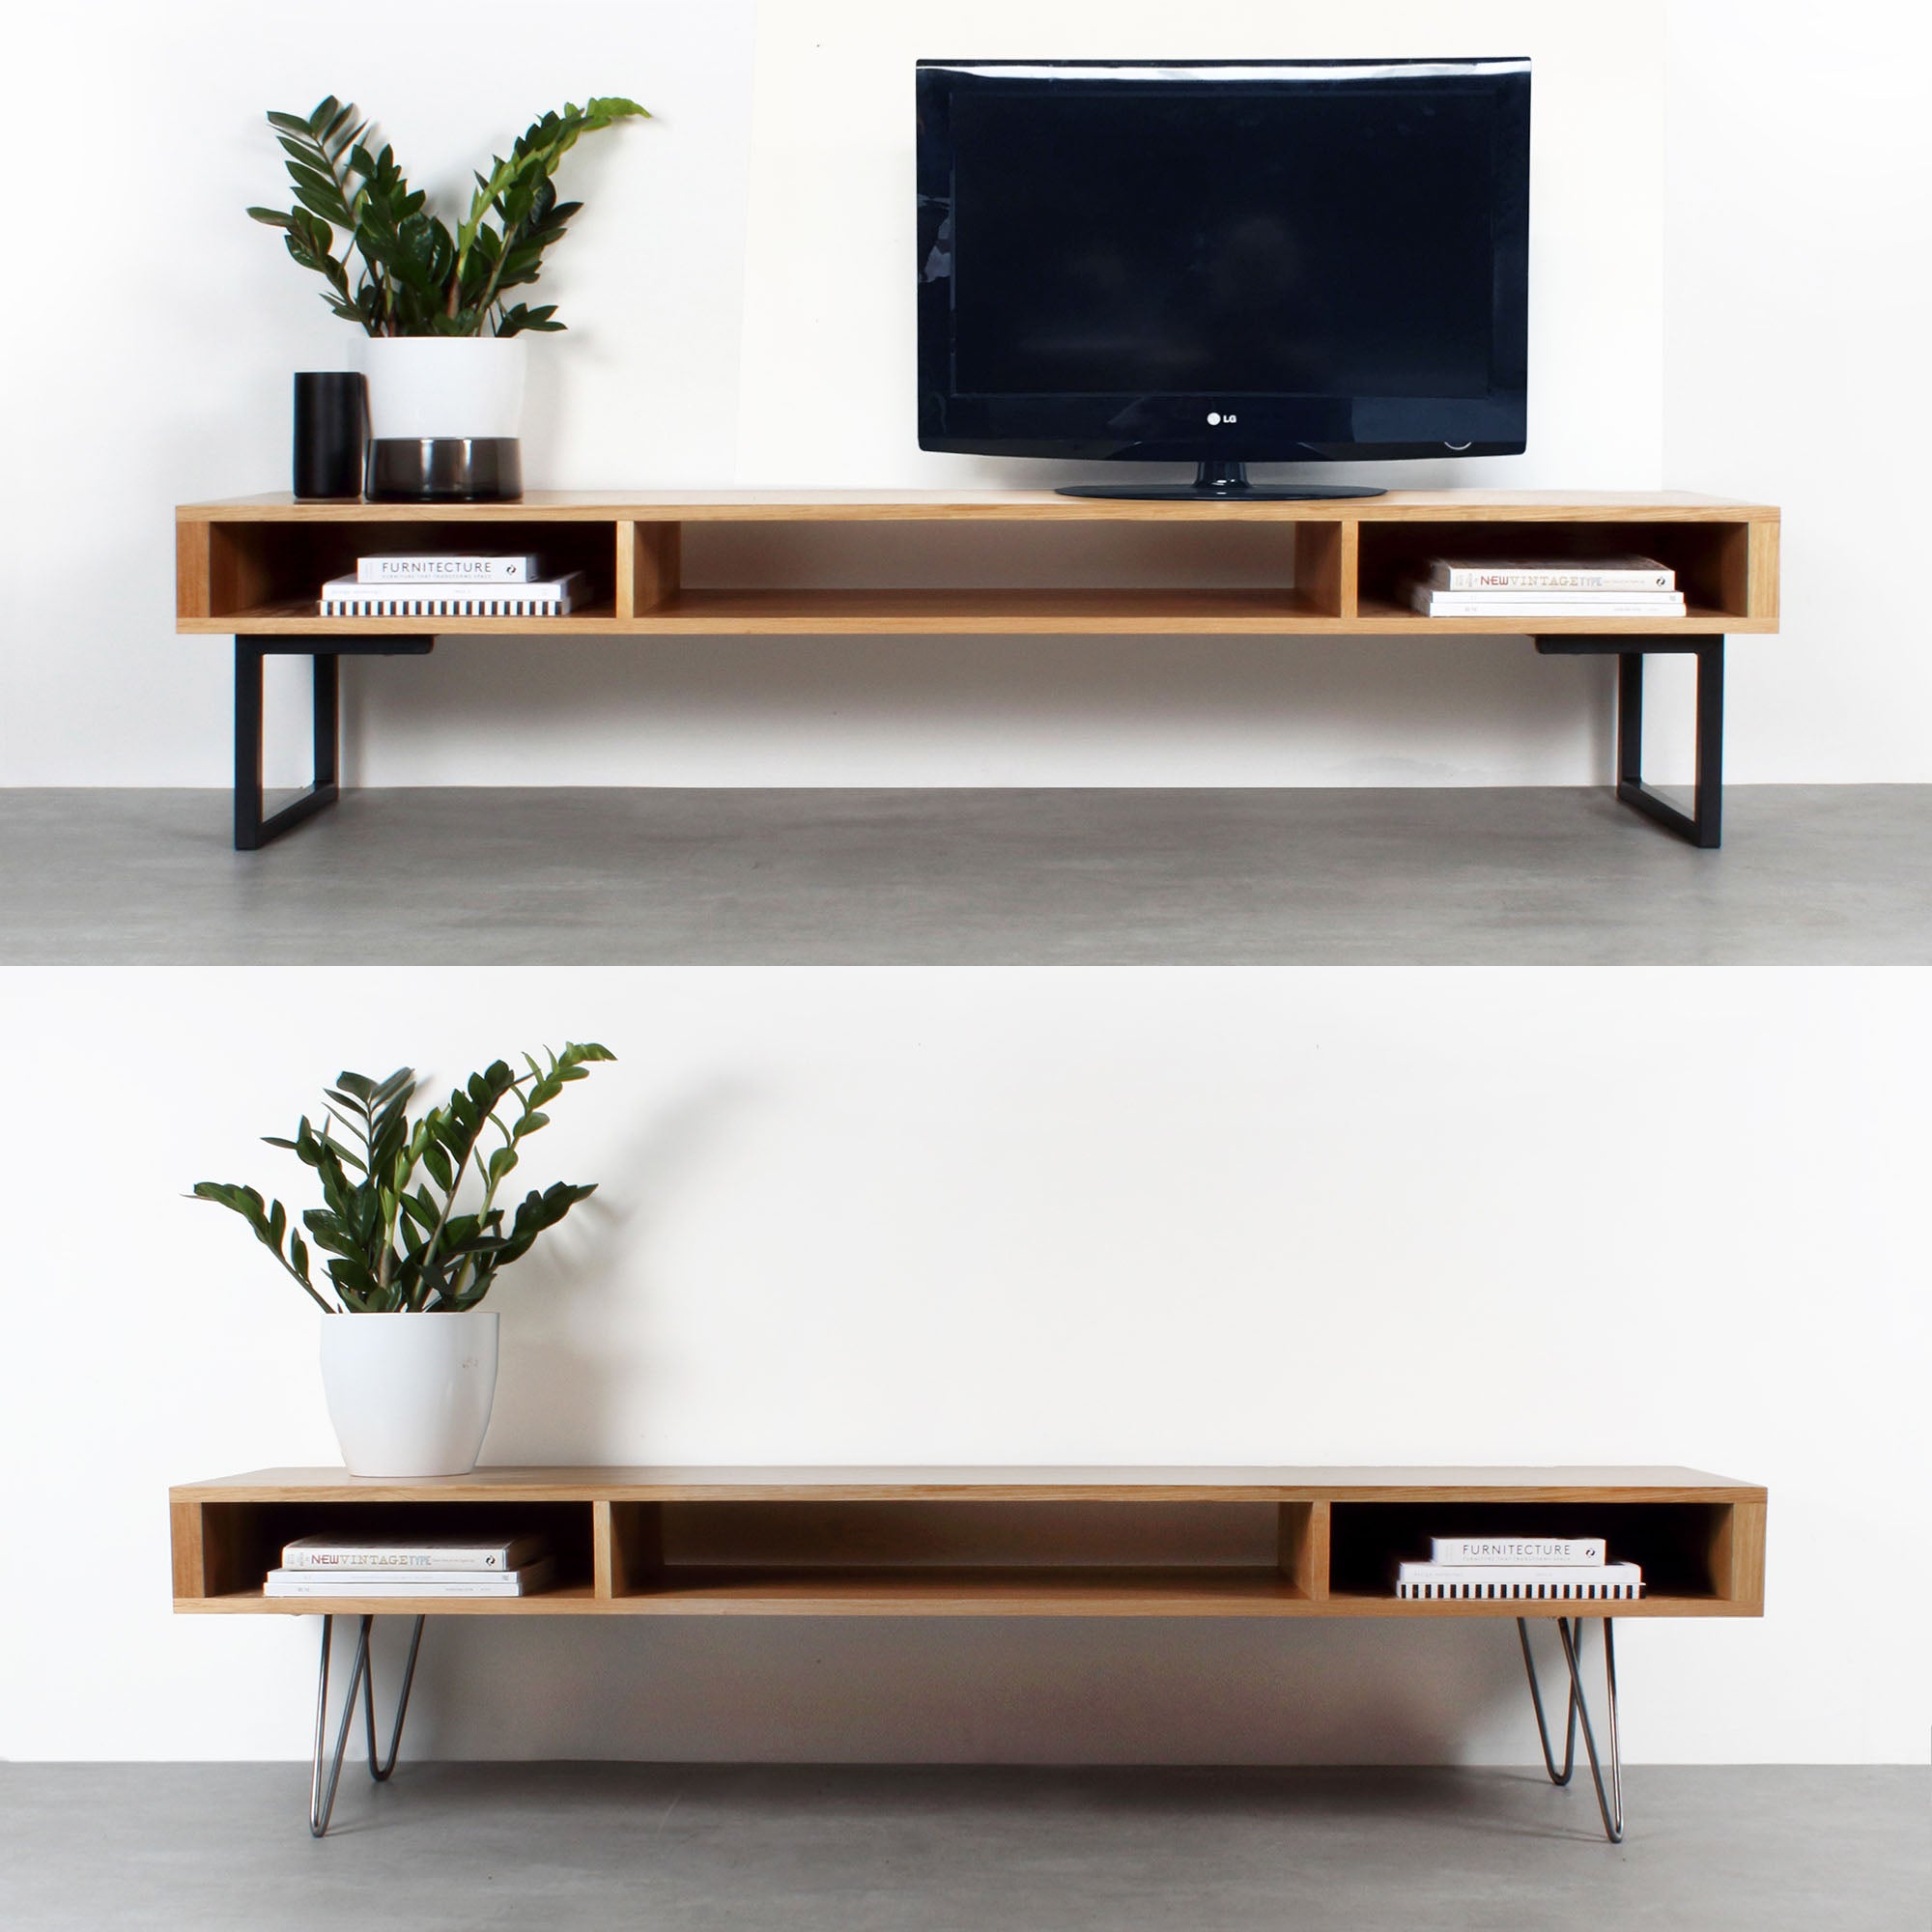 IN STOCK - Marston Wide TV Stand or Coffee Table in Oak 200cm (79")